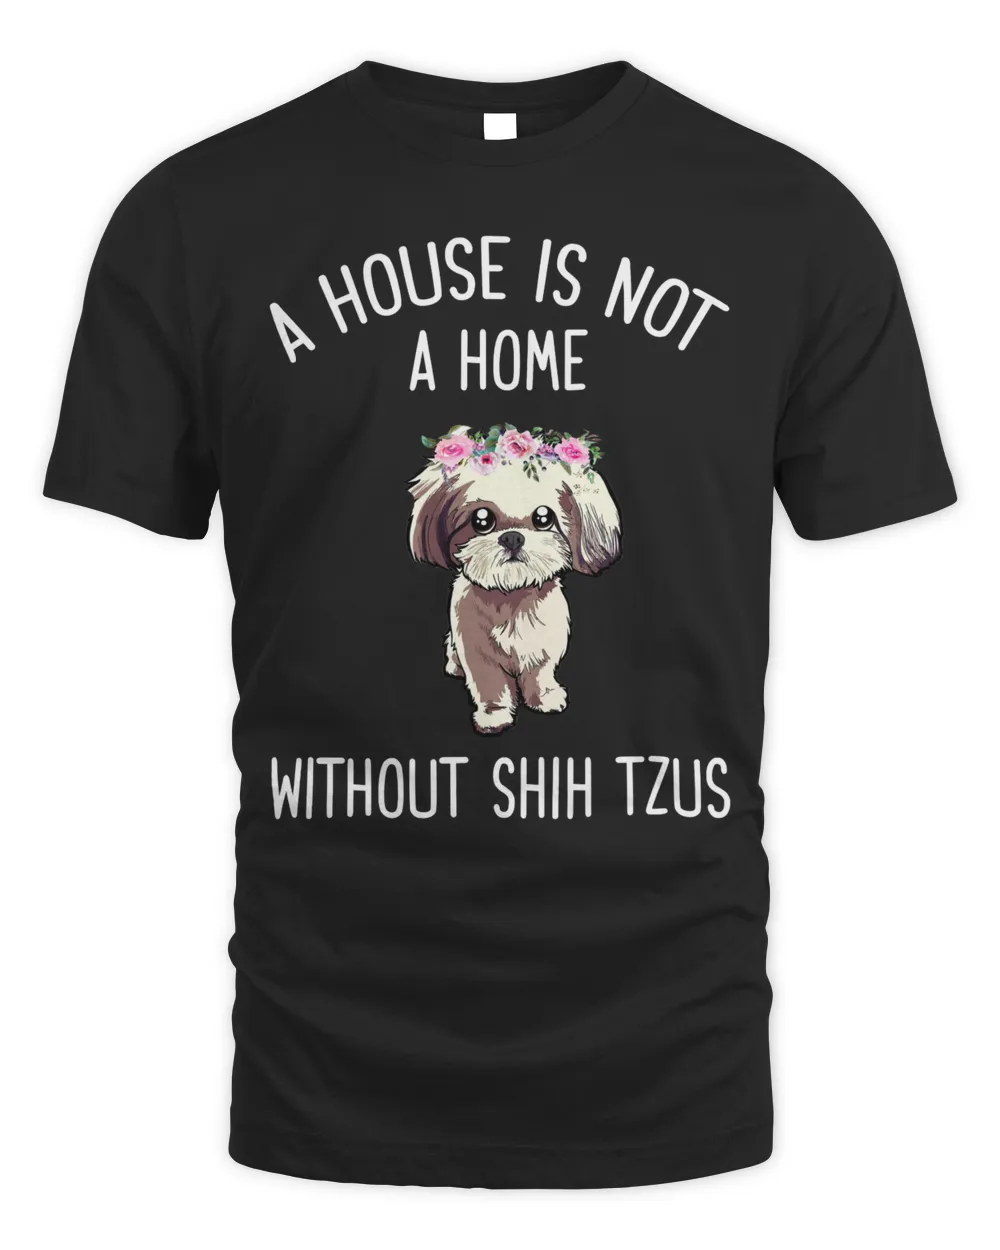 A House is Not a Home Without Shih Tzus t shirt